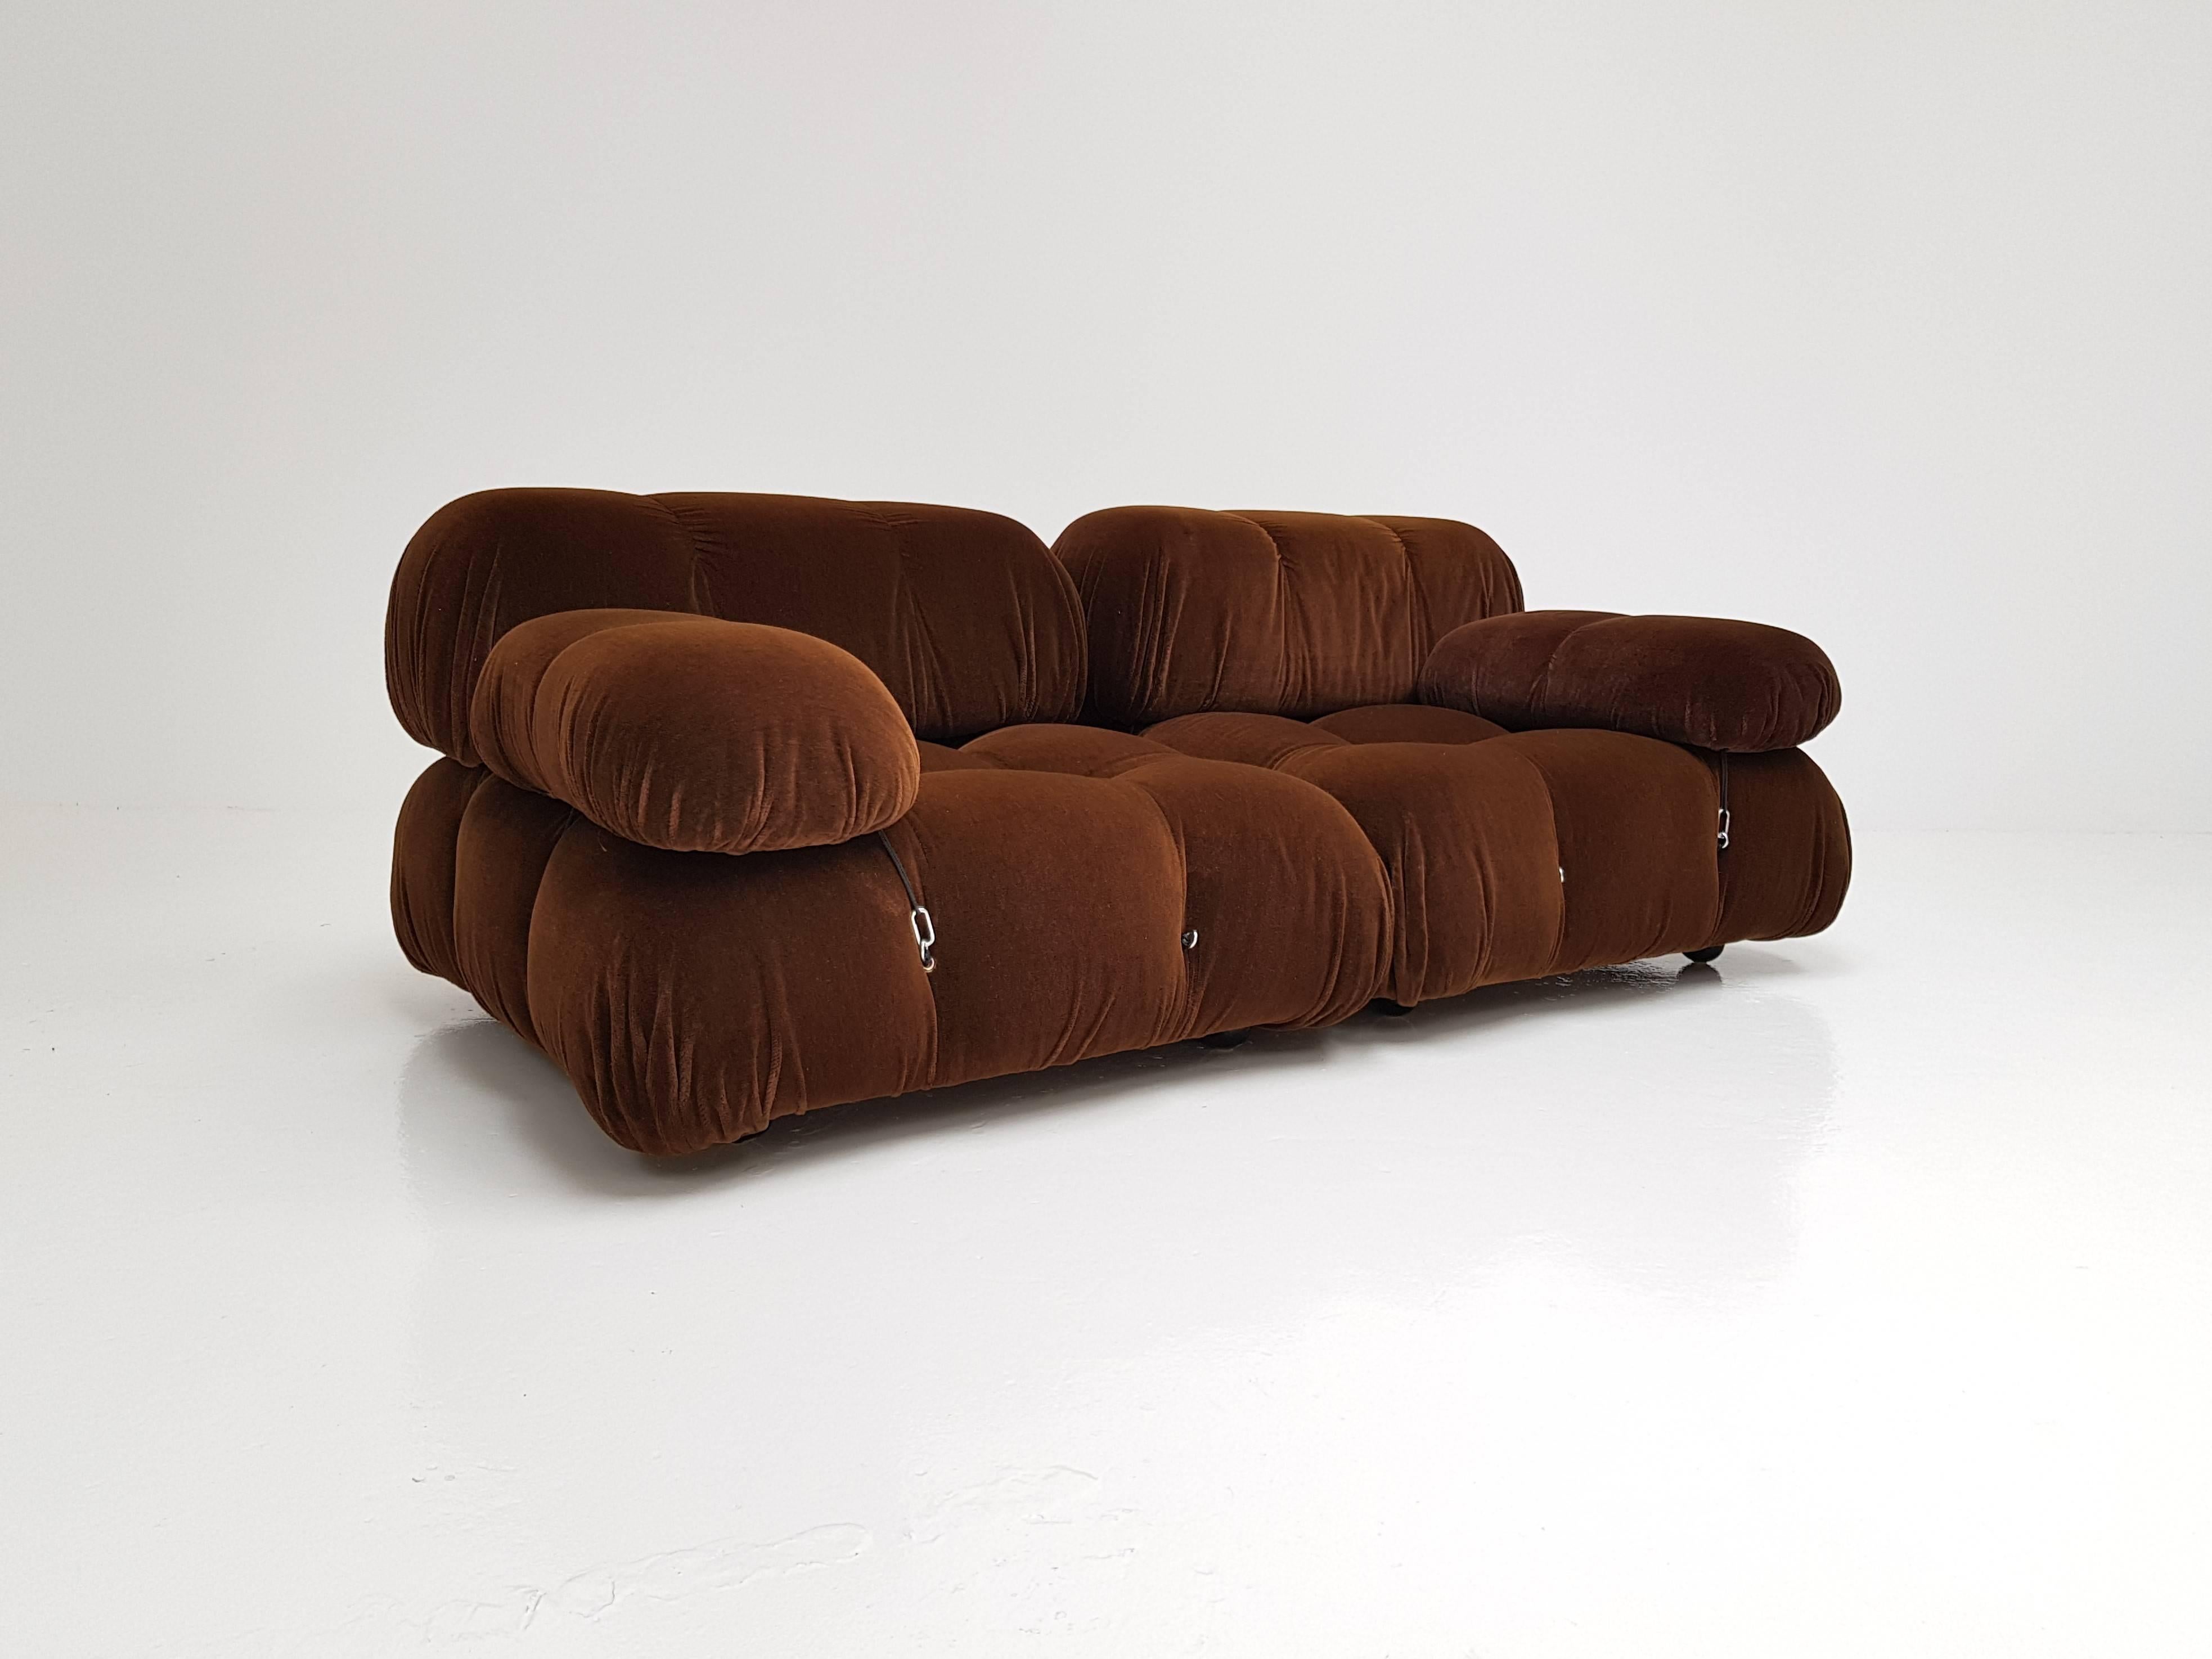 A Mario Bellini 'Camaleonda' modular sofa for B&B Italia with dark chocolate coloured fabric.

The Camaleonda was designed by Mario Bellini in 1971 and was manufactured first by C&B Italia and later by B&B Italia. This particular piece produced by